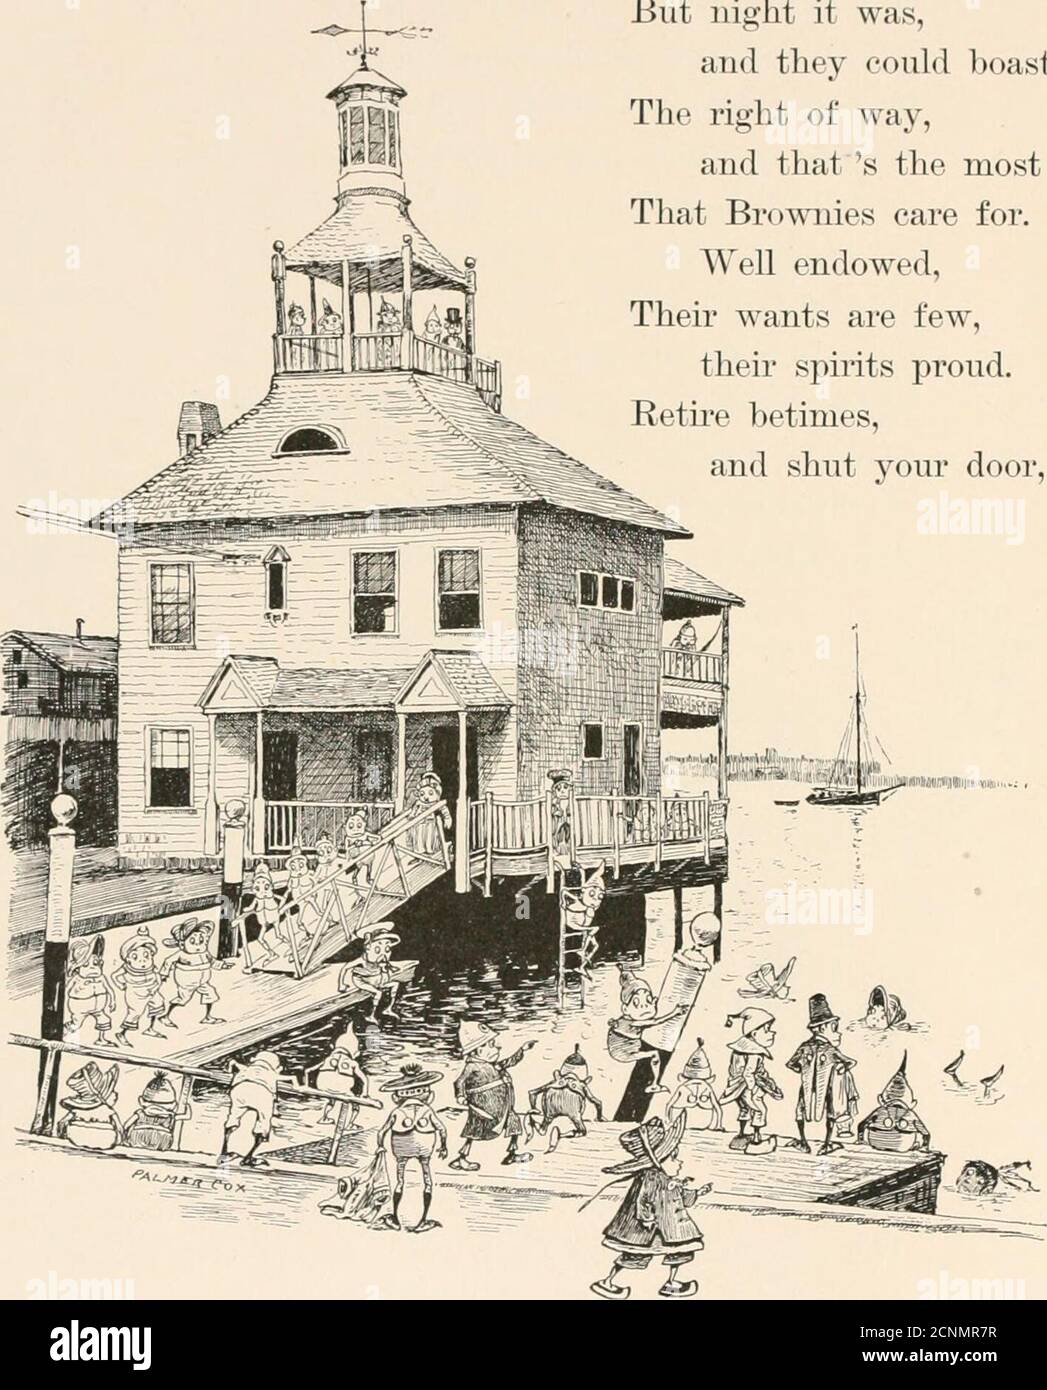 . The brownies through the Union . And soon the band so bold and spryThe fashionable poi-t drew nigh,And stood to view the buildings grandThat stretched along the famous strandWliere mingling thousands tln*ougli the dayDisport themselves as best they may. 21 THE BROWNIES IN RHODE ISLAND. But night it was, aud they eoukl boastThe right of way, and thats the mostThat Brownies care for. Well endowed,Their wants are few, their spirits proud.Retue betimes, and shut your door.. And they 11 not ask a favor more.Upon themselves be sure they 11 wait,And think it not beneath then- state. Stock Photo